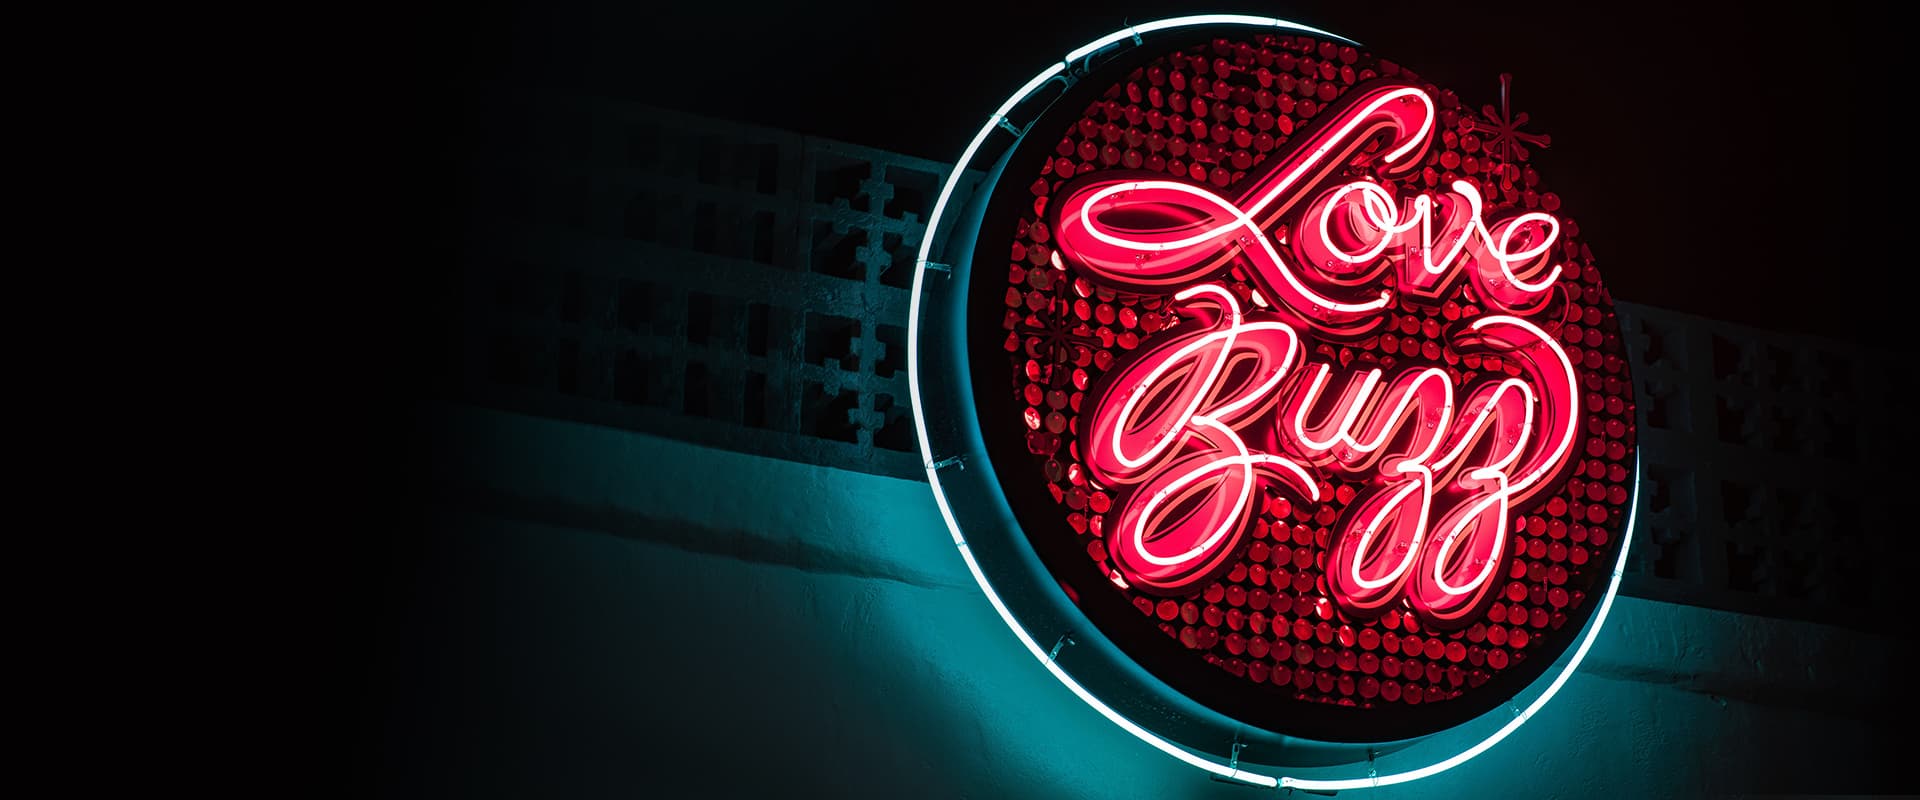 Customized Neon Sign Builder	 